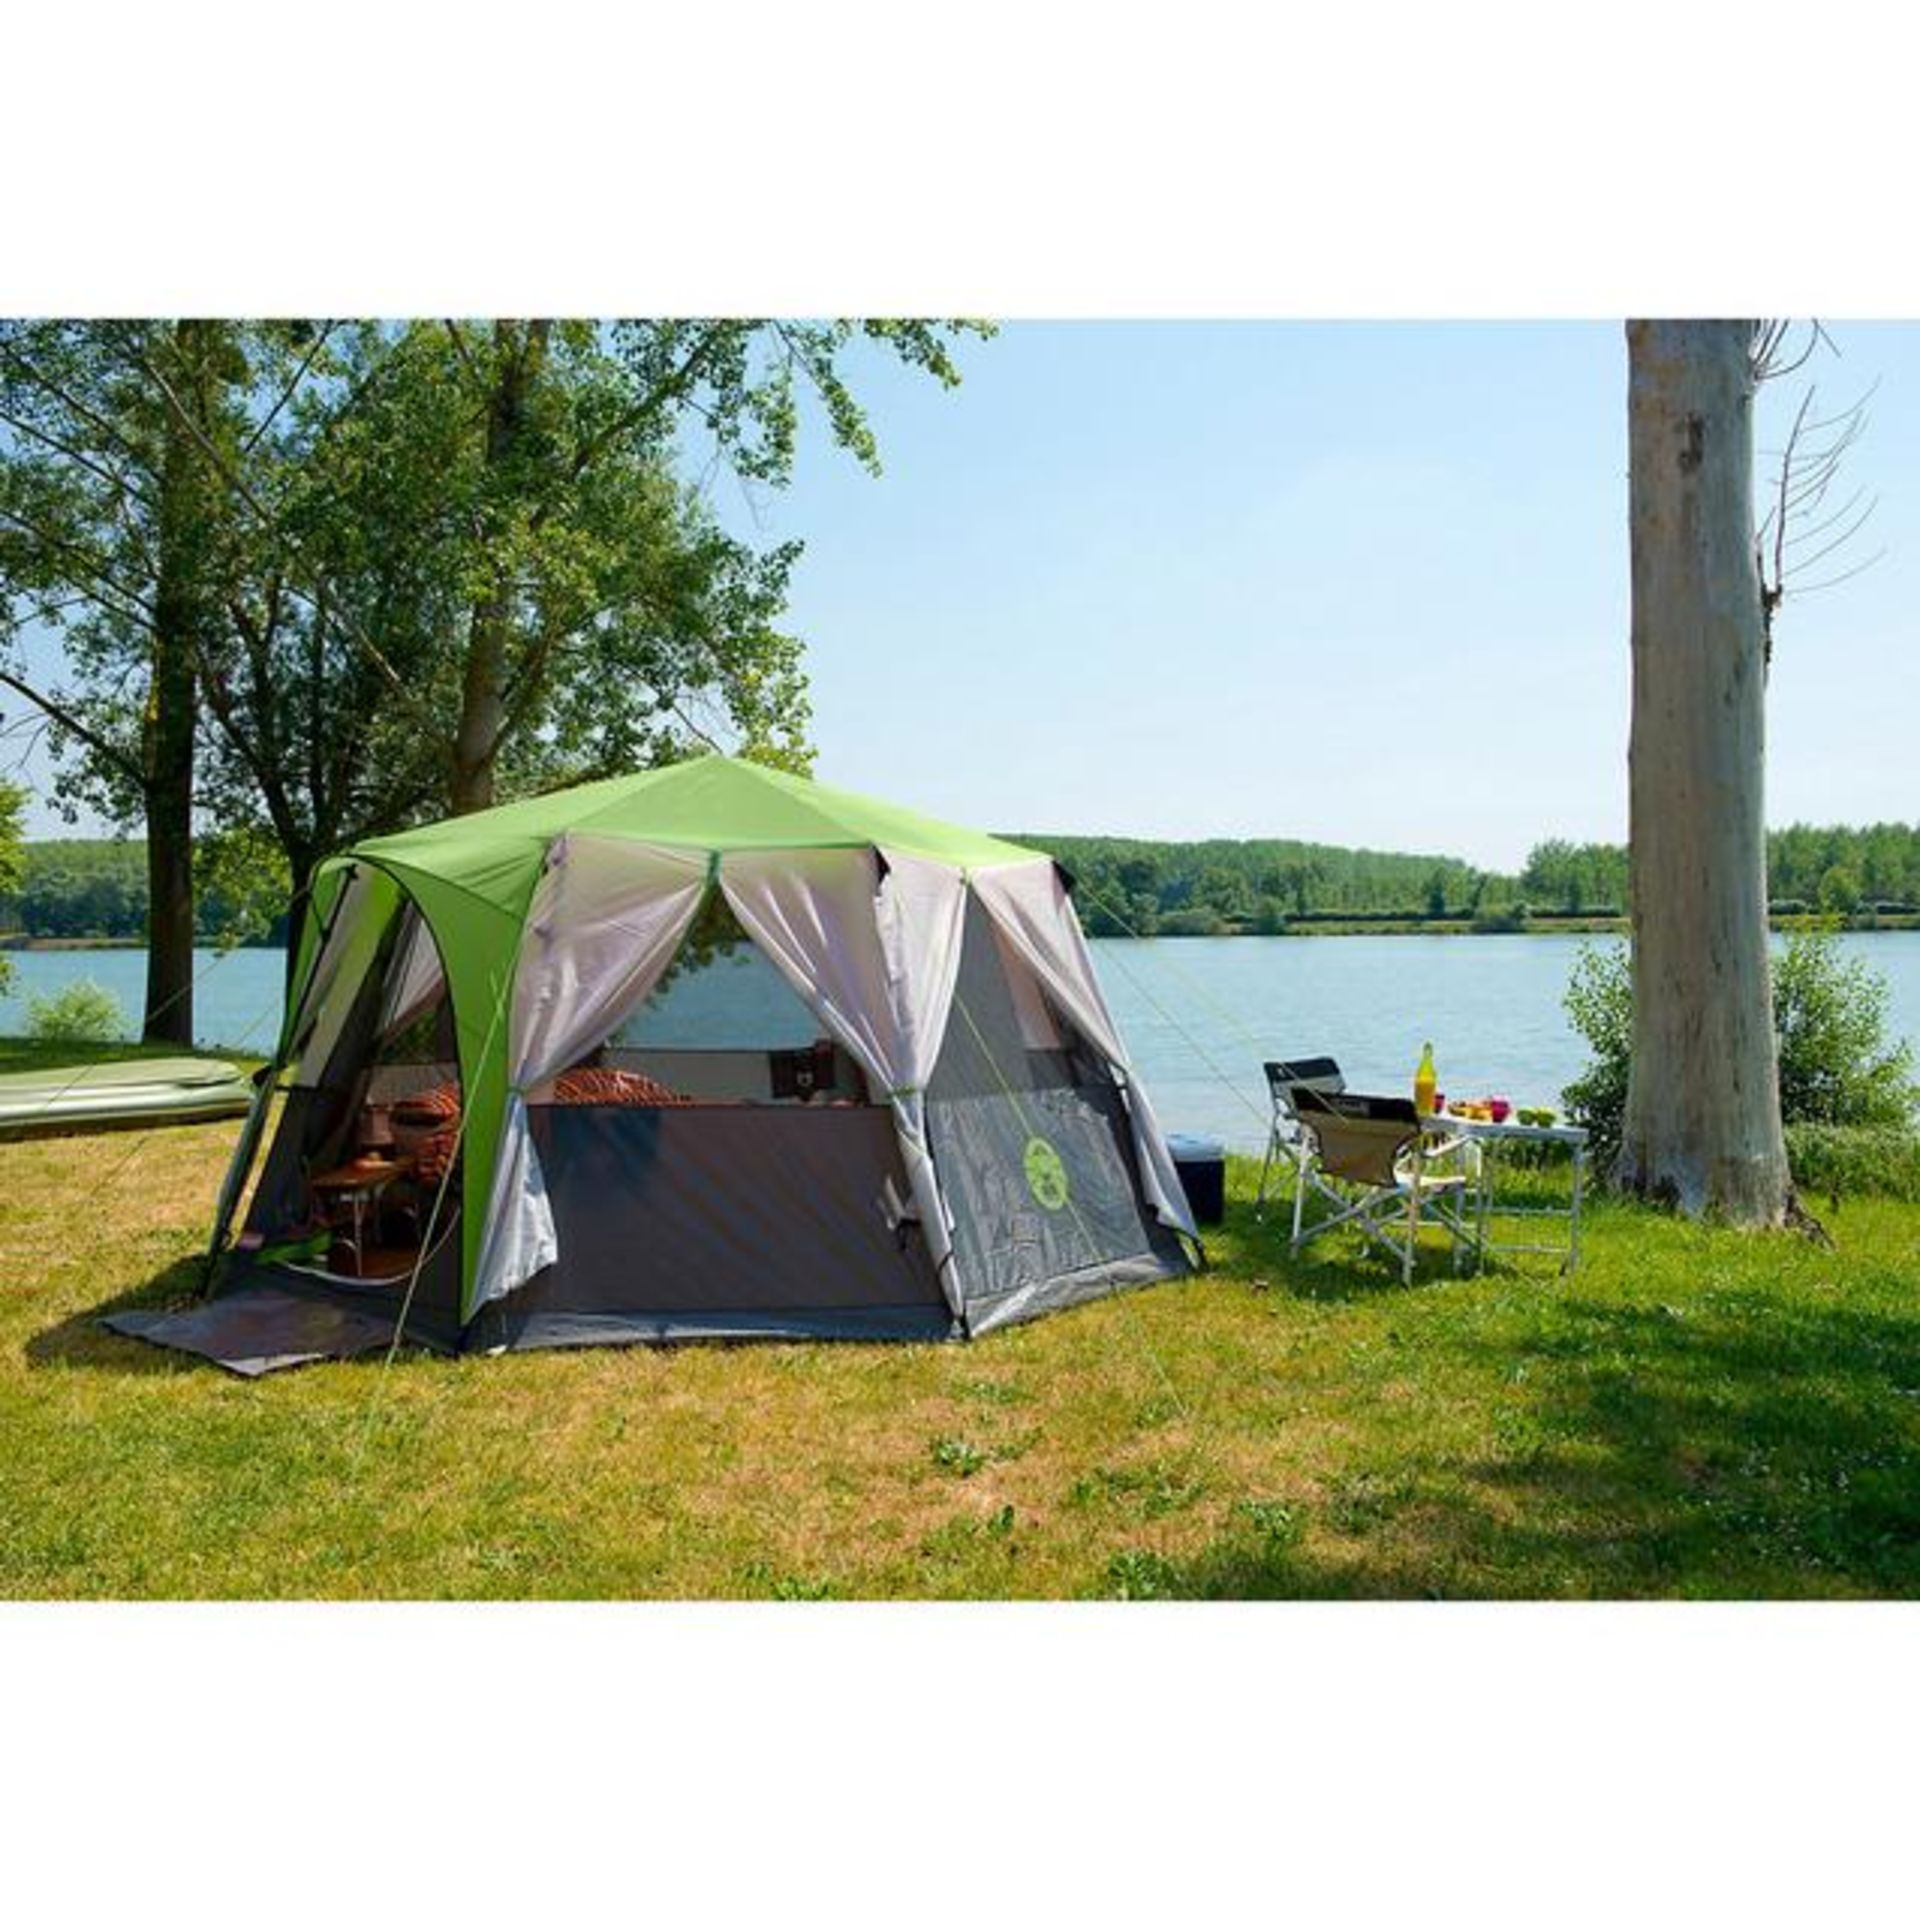 1 COLEMAN CORTES OCTAGON 8 PERSON TENT RRP Â£249.99 (GENERIC IMAGE GUIDE, DISASSEMBLED LOOSE PARTS)